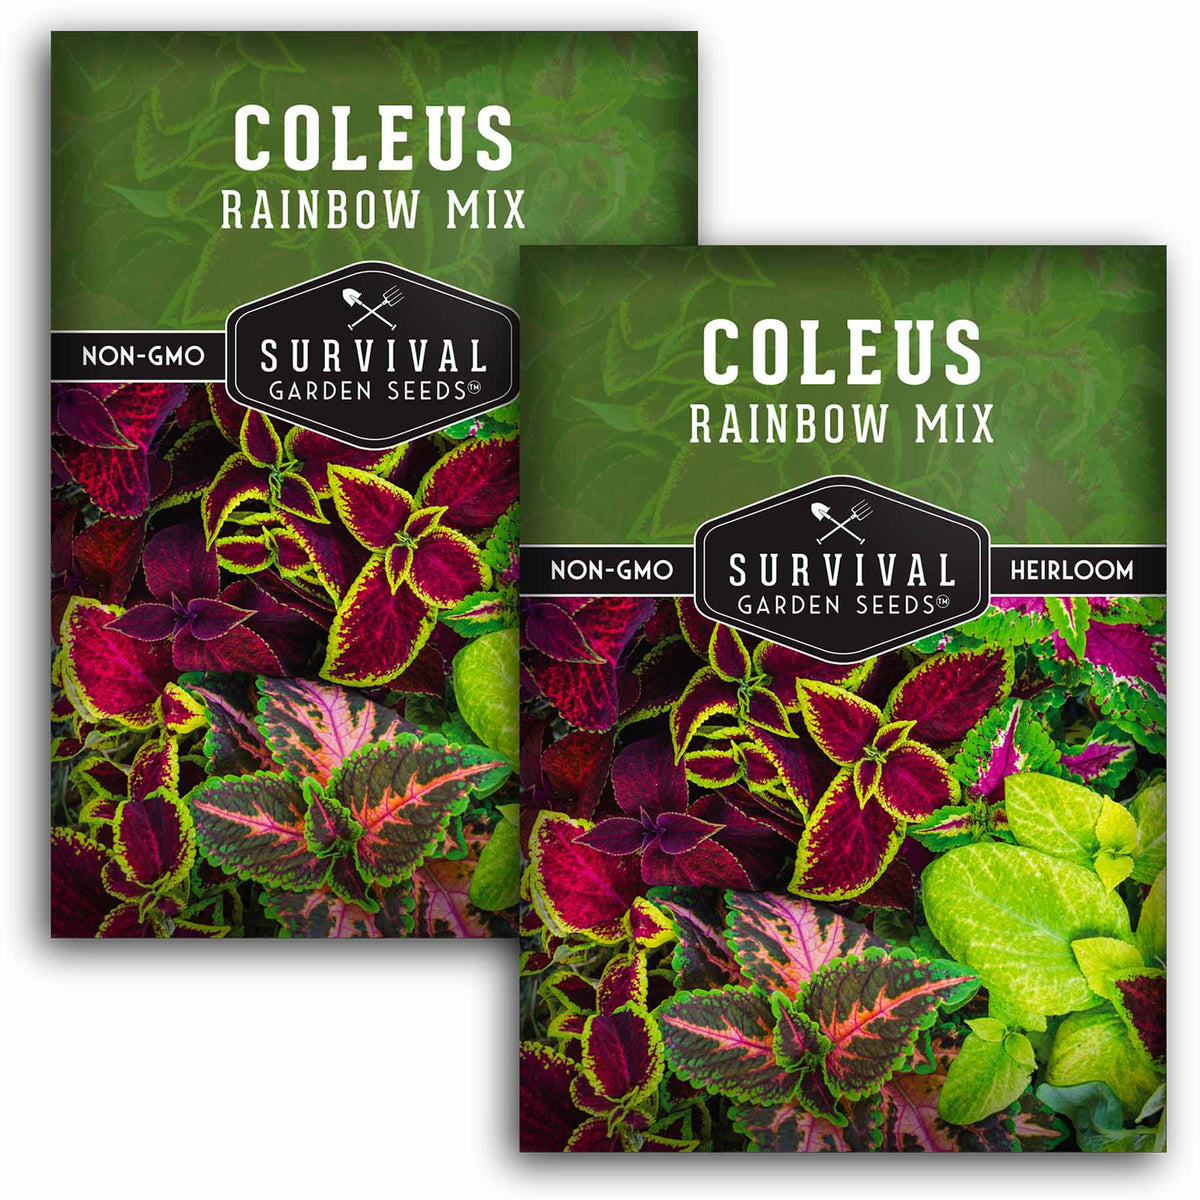 2 packets of Rainbow Mix Coleus seeds